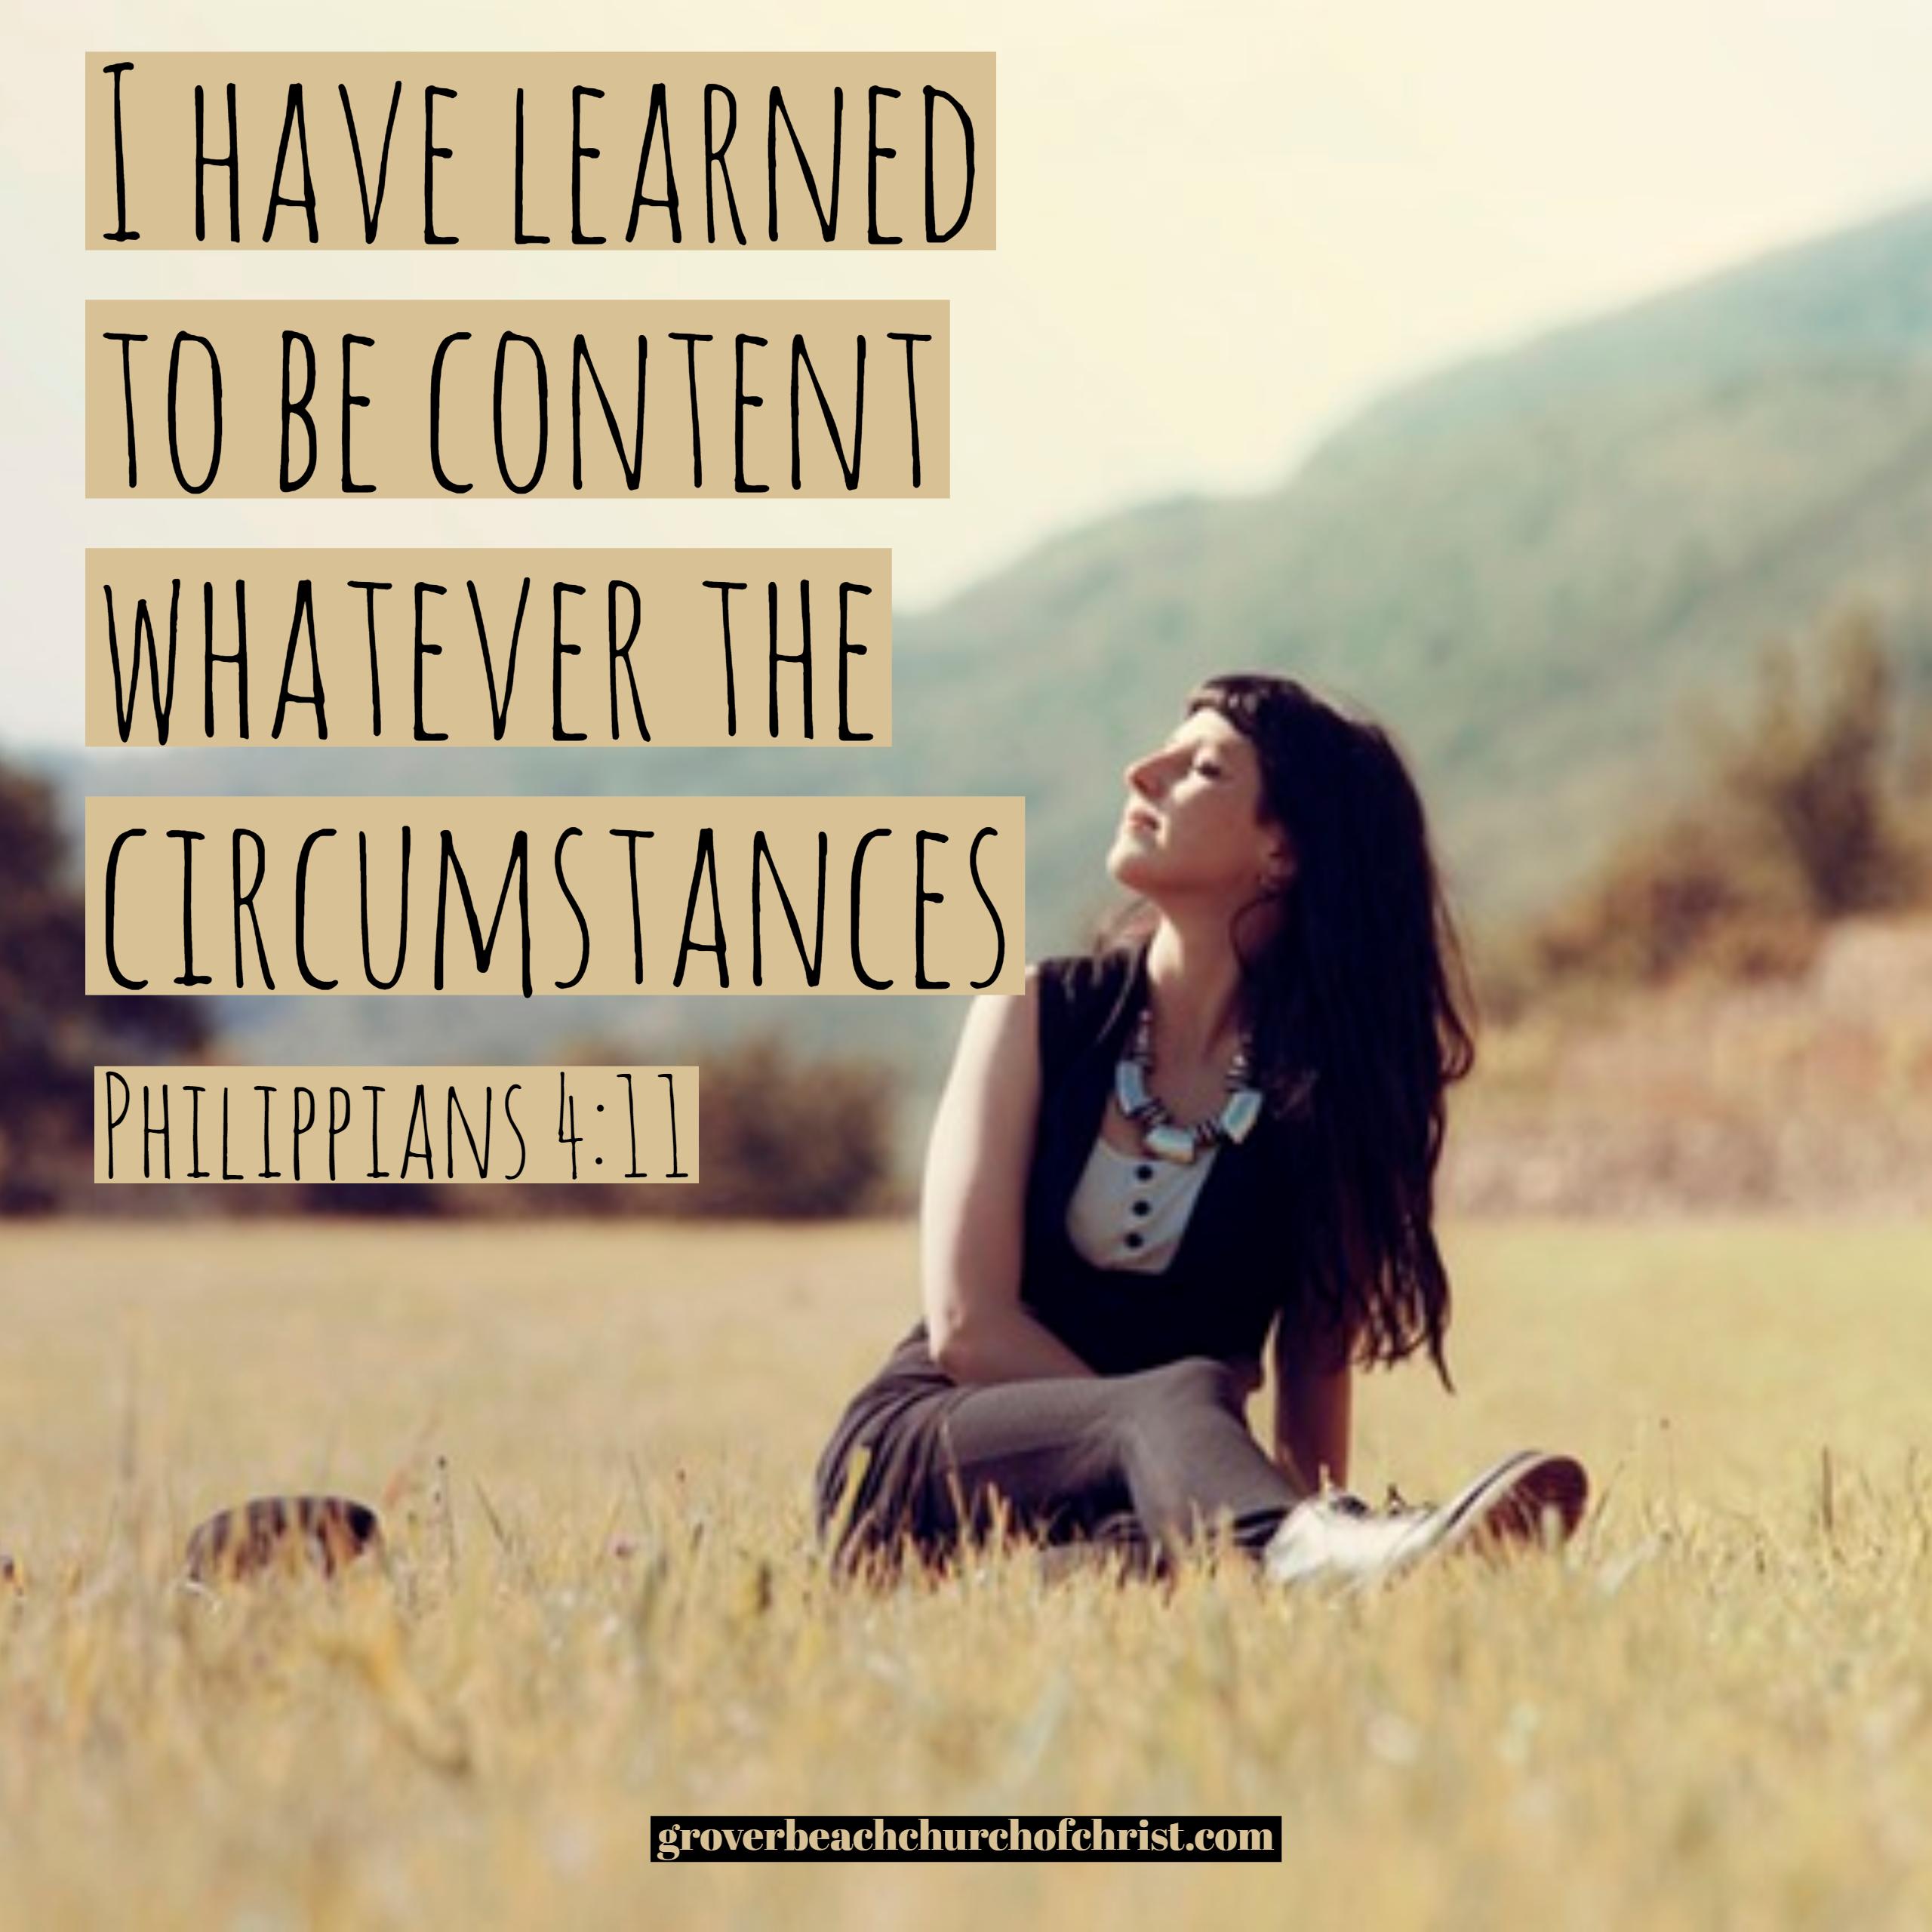 philippians-4:11-i-have-learned-to-be-content